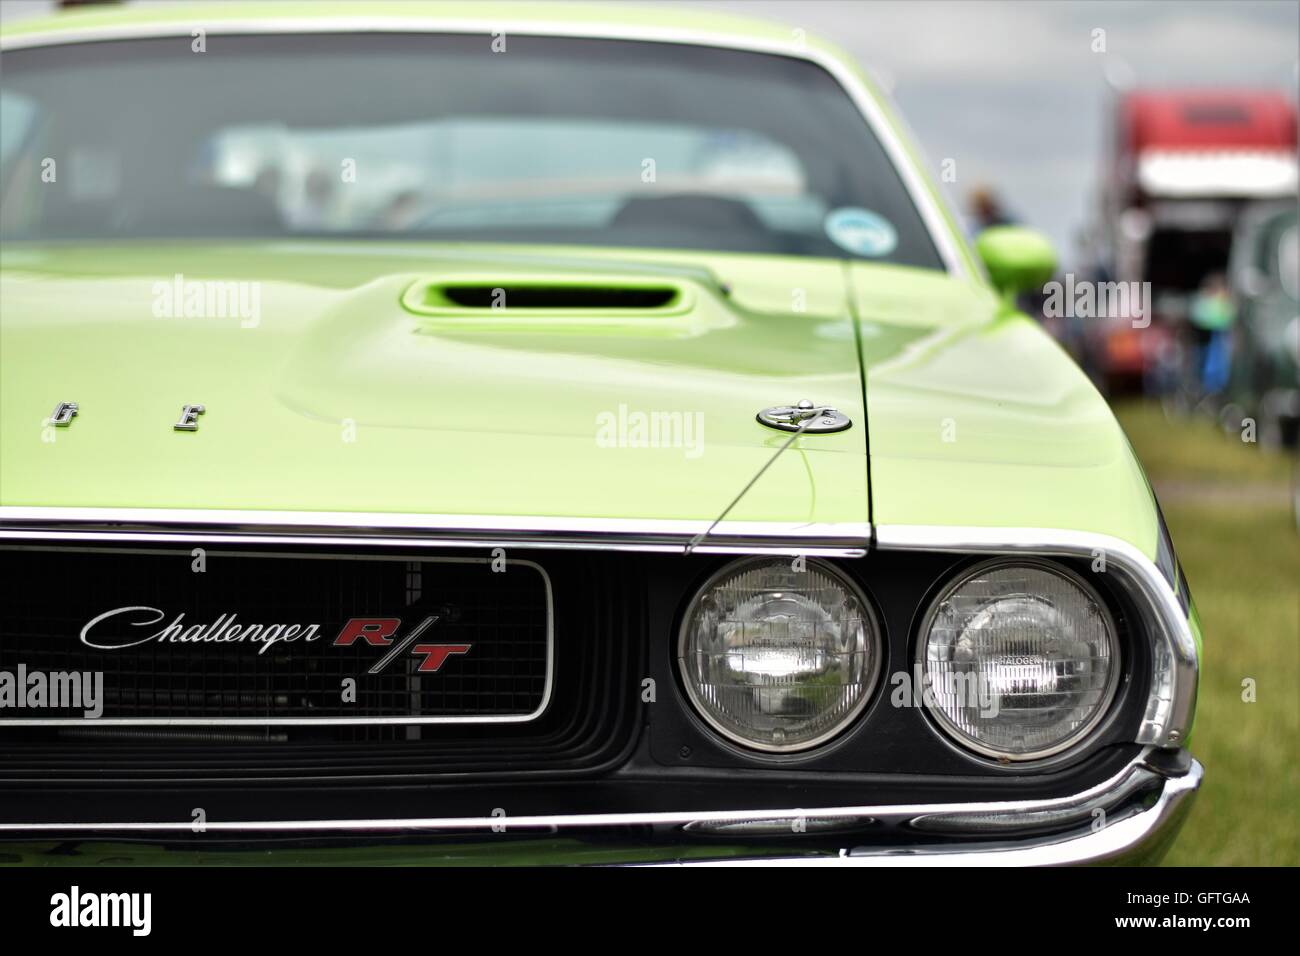 Dodge Challenger in display at car show Stock Photo